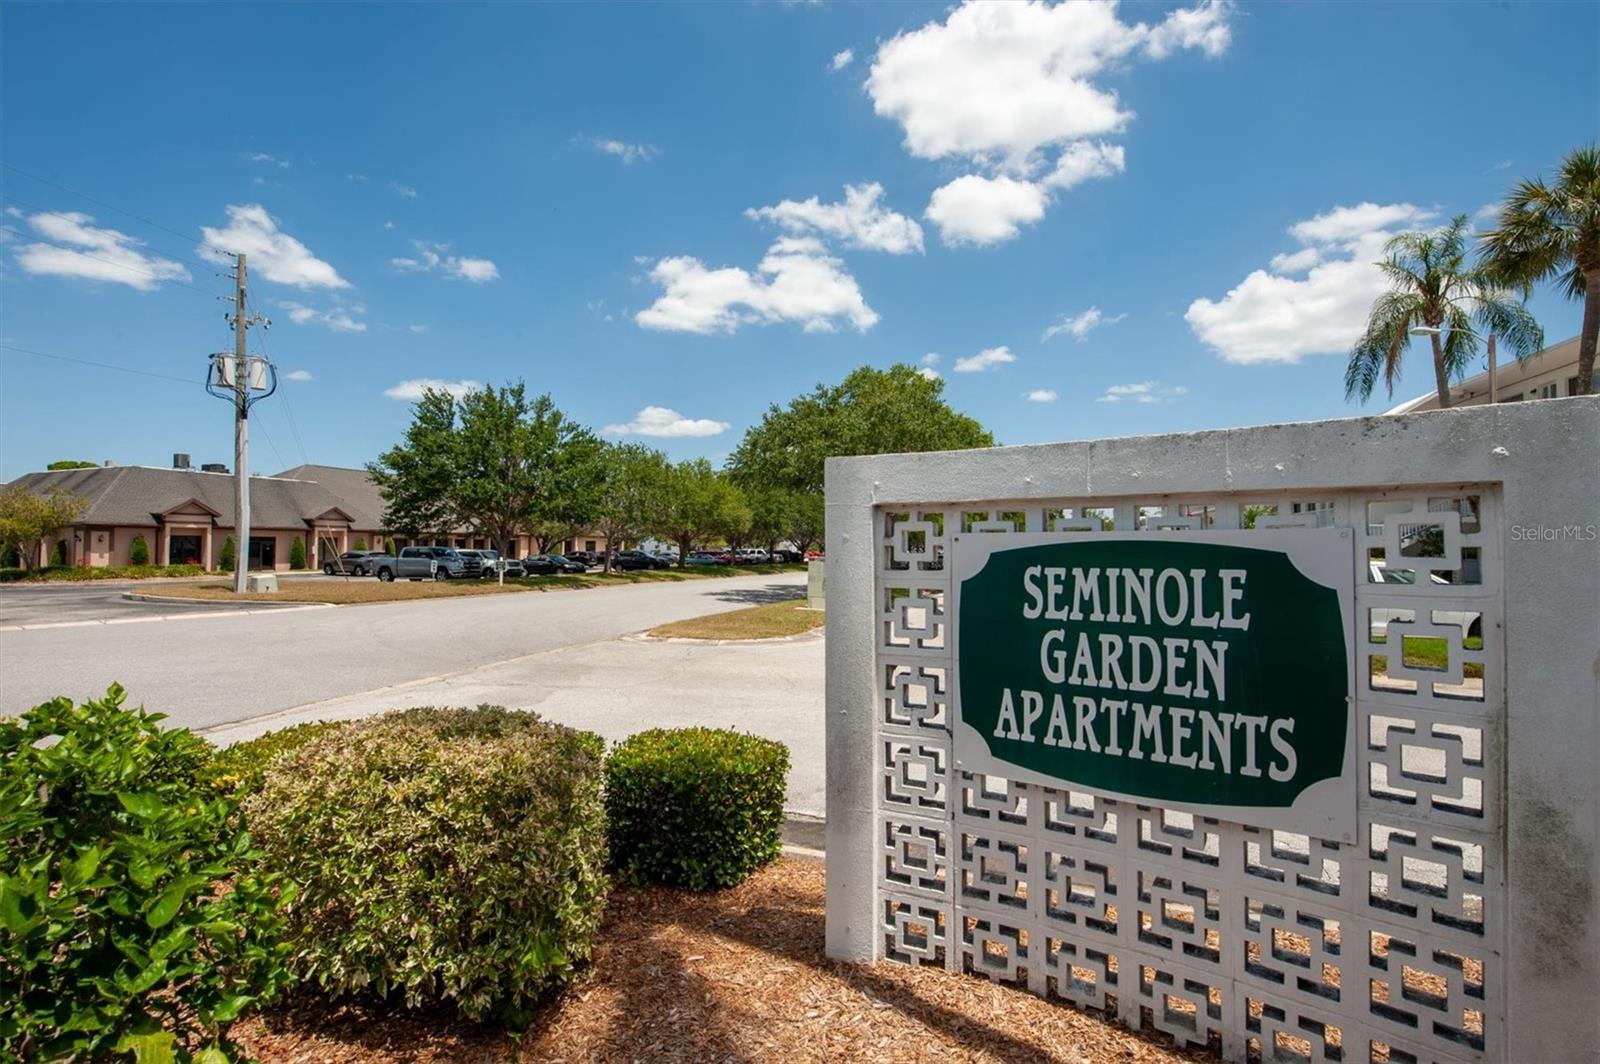 The entrance to Seminole Gardens from 113th Street. There's another entrance off 86th Av N and yet another one from the back of Semniole City Center. It's really easy to walk/bike/scoot over to the mall.